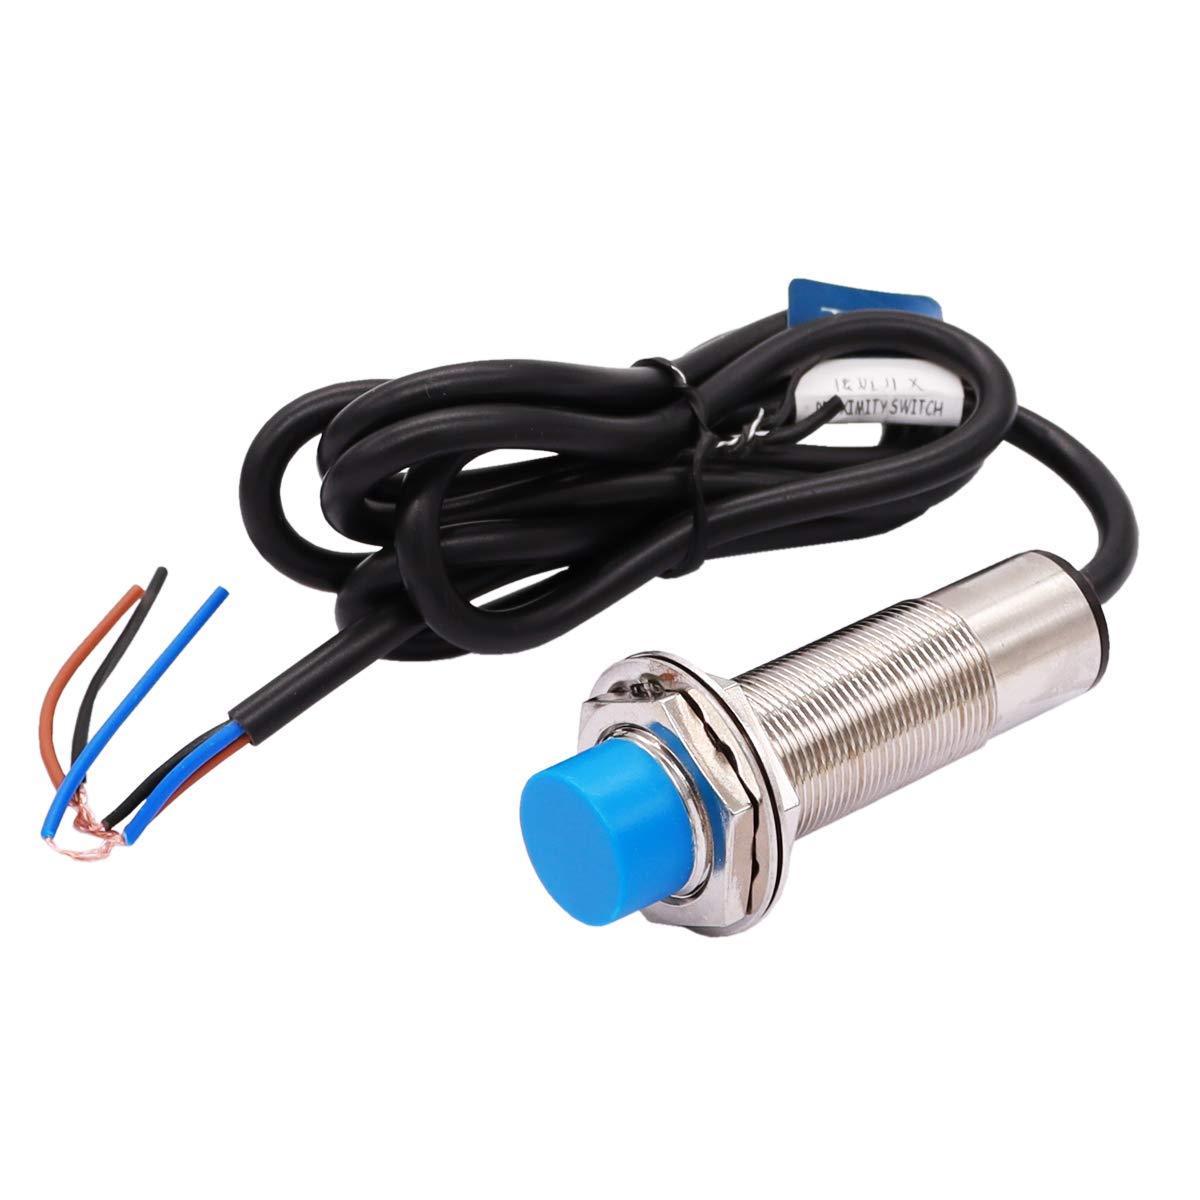 3D Printer Auto Bed Leveling Inductive Proximity Sensor Detection Switch for CR-10S Series